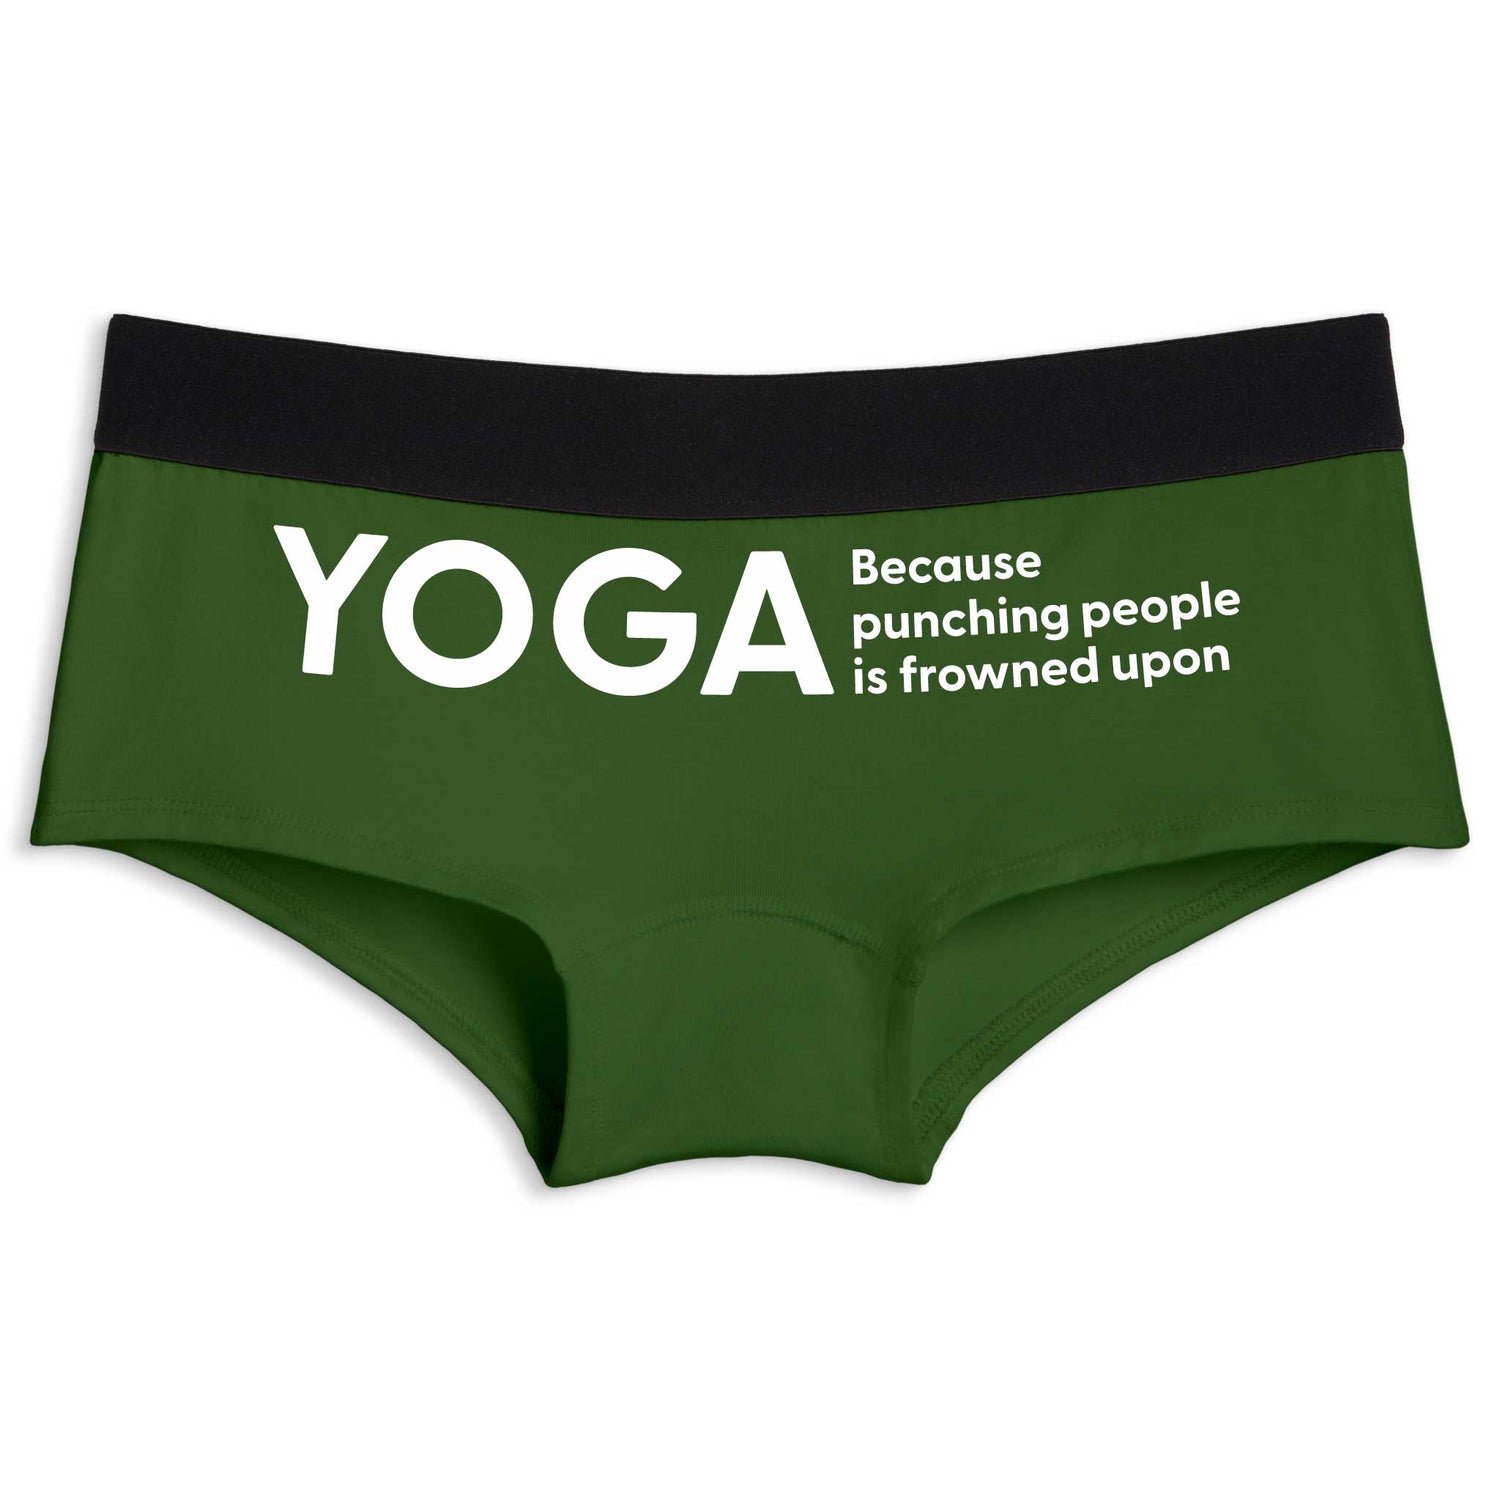 Yoga. Because punching people is frowned upon | Boyshort underwear